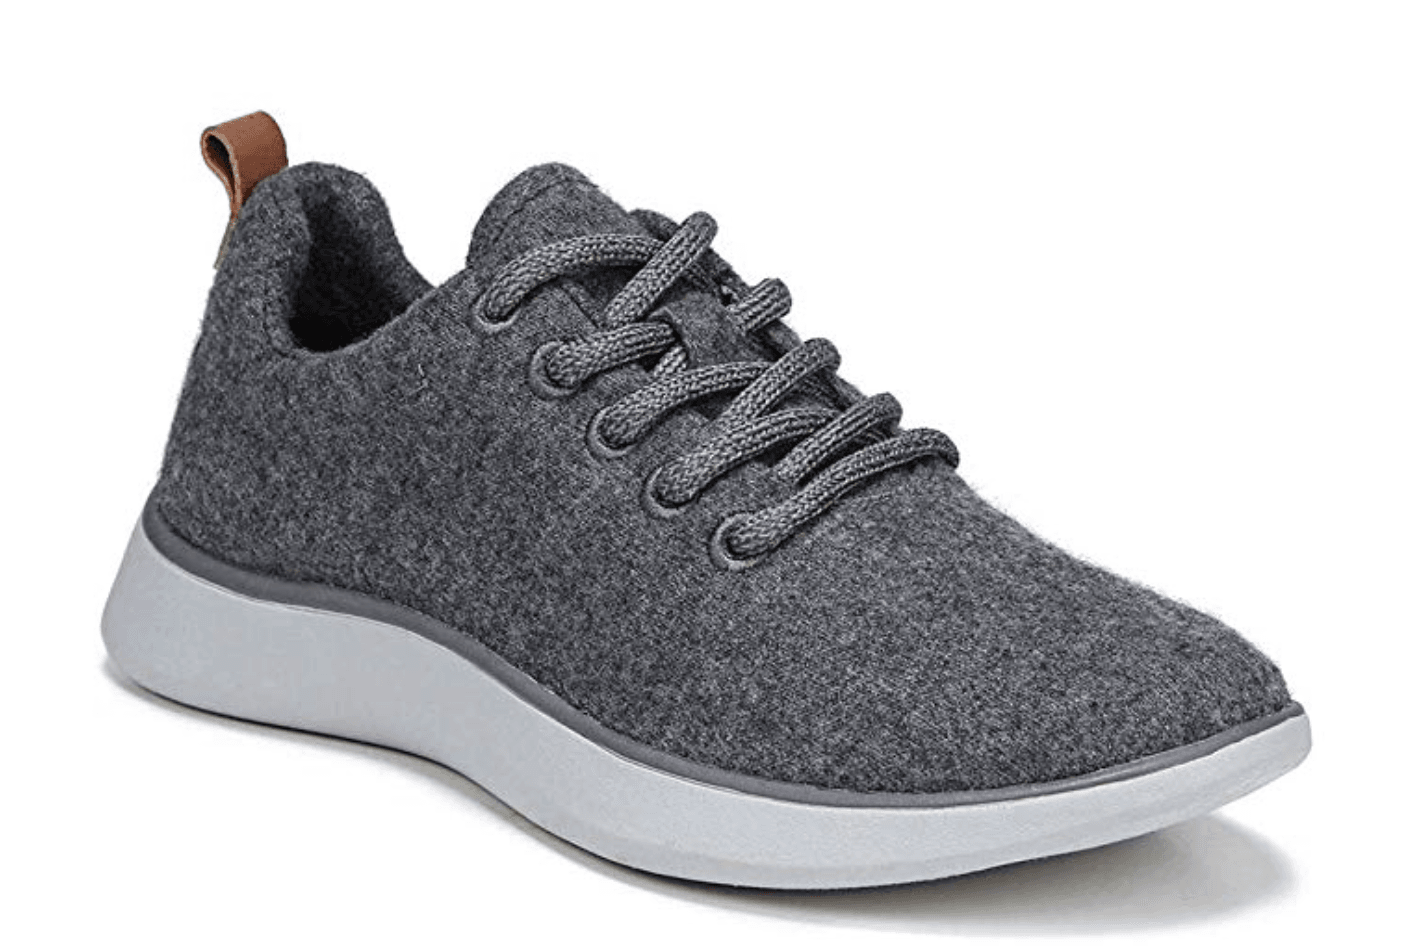 The Best Allbirds Wool Runner Dupes You Can Buy - Allbirds Shoes - Allbirds Sneakers - Allbirds Dupes - Allbirds Price - Allbirds Wool Runners - Allbirds Womens Sneakers #allbirds #sneakers